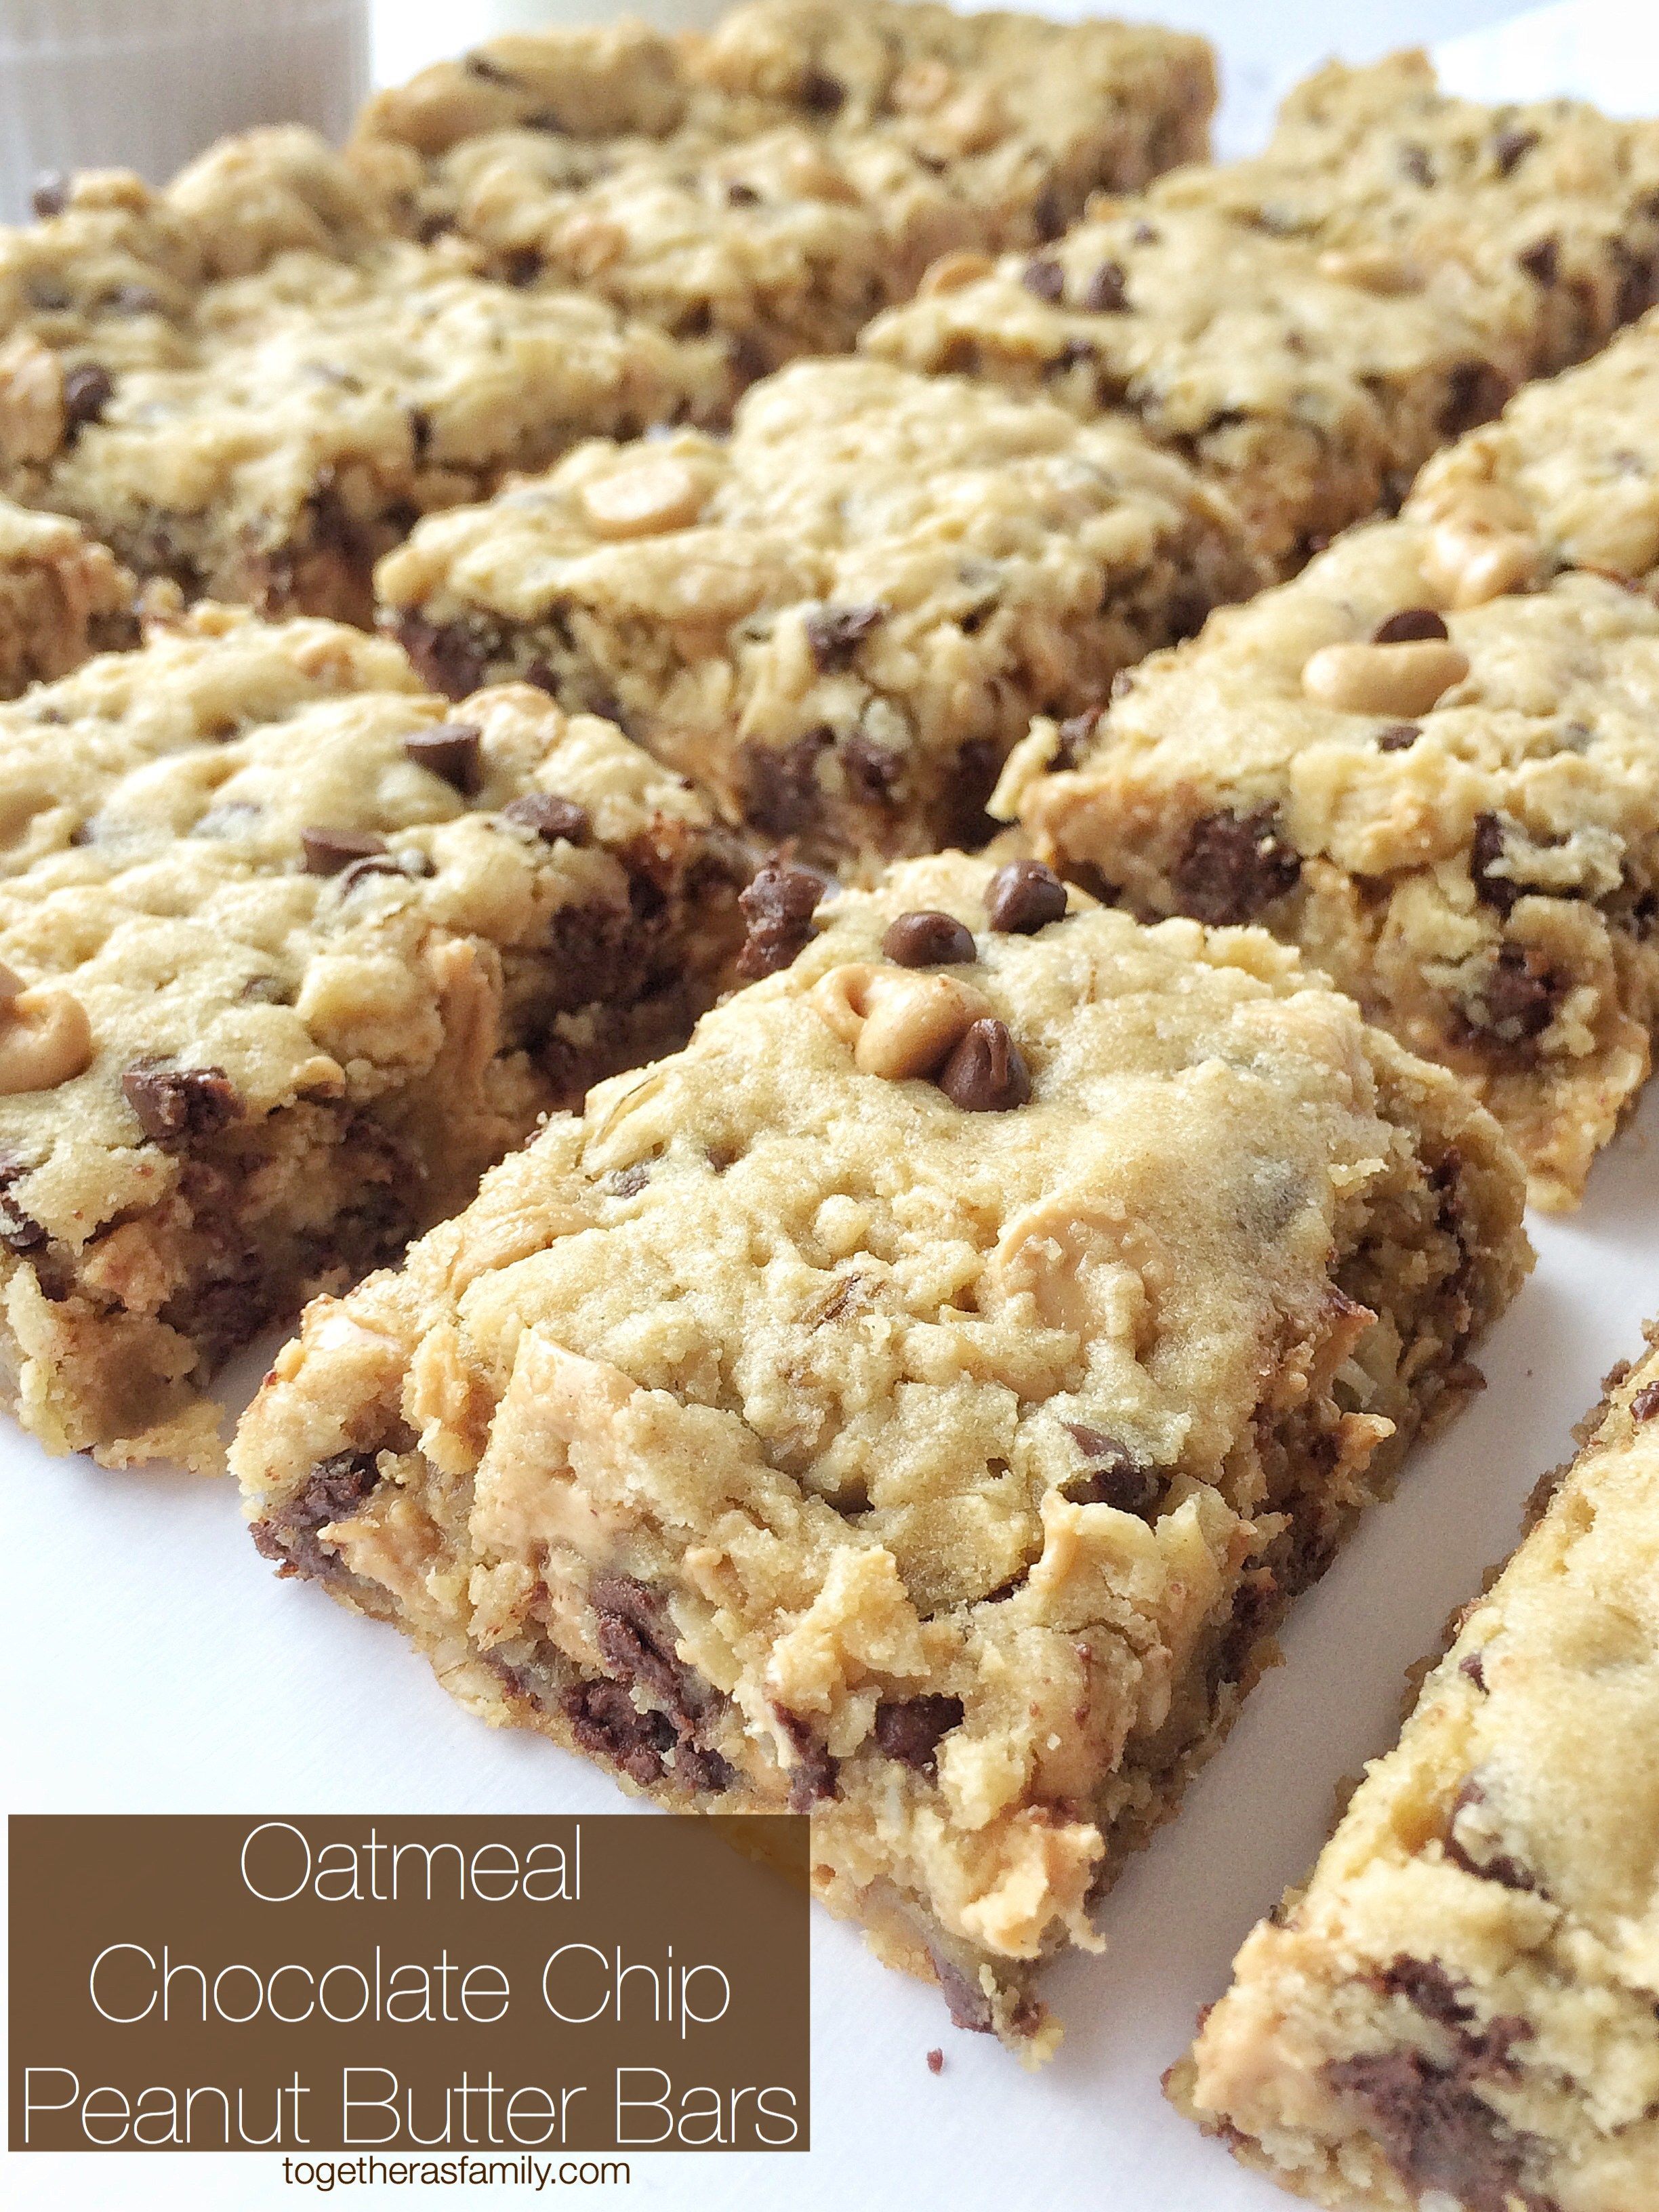 OATMEAL CHOCOLATE CHIP PEANUT BUTTER BARS | www.togetherasfam…